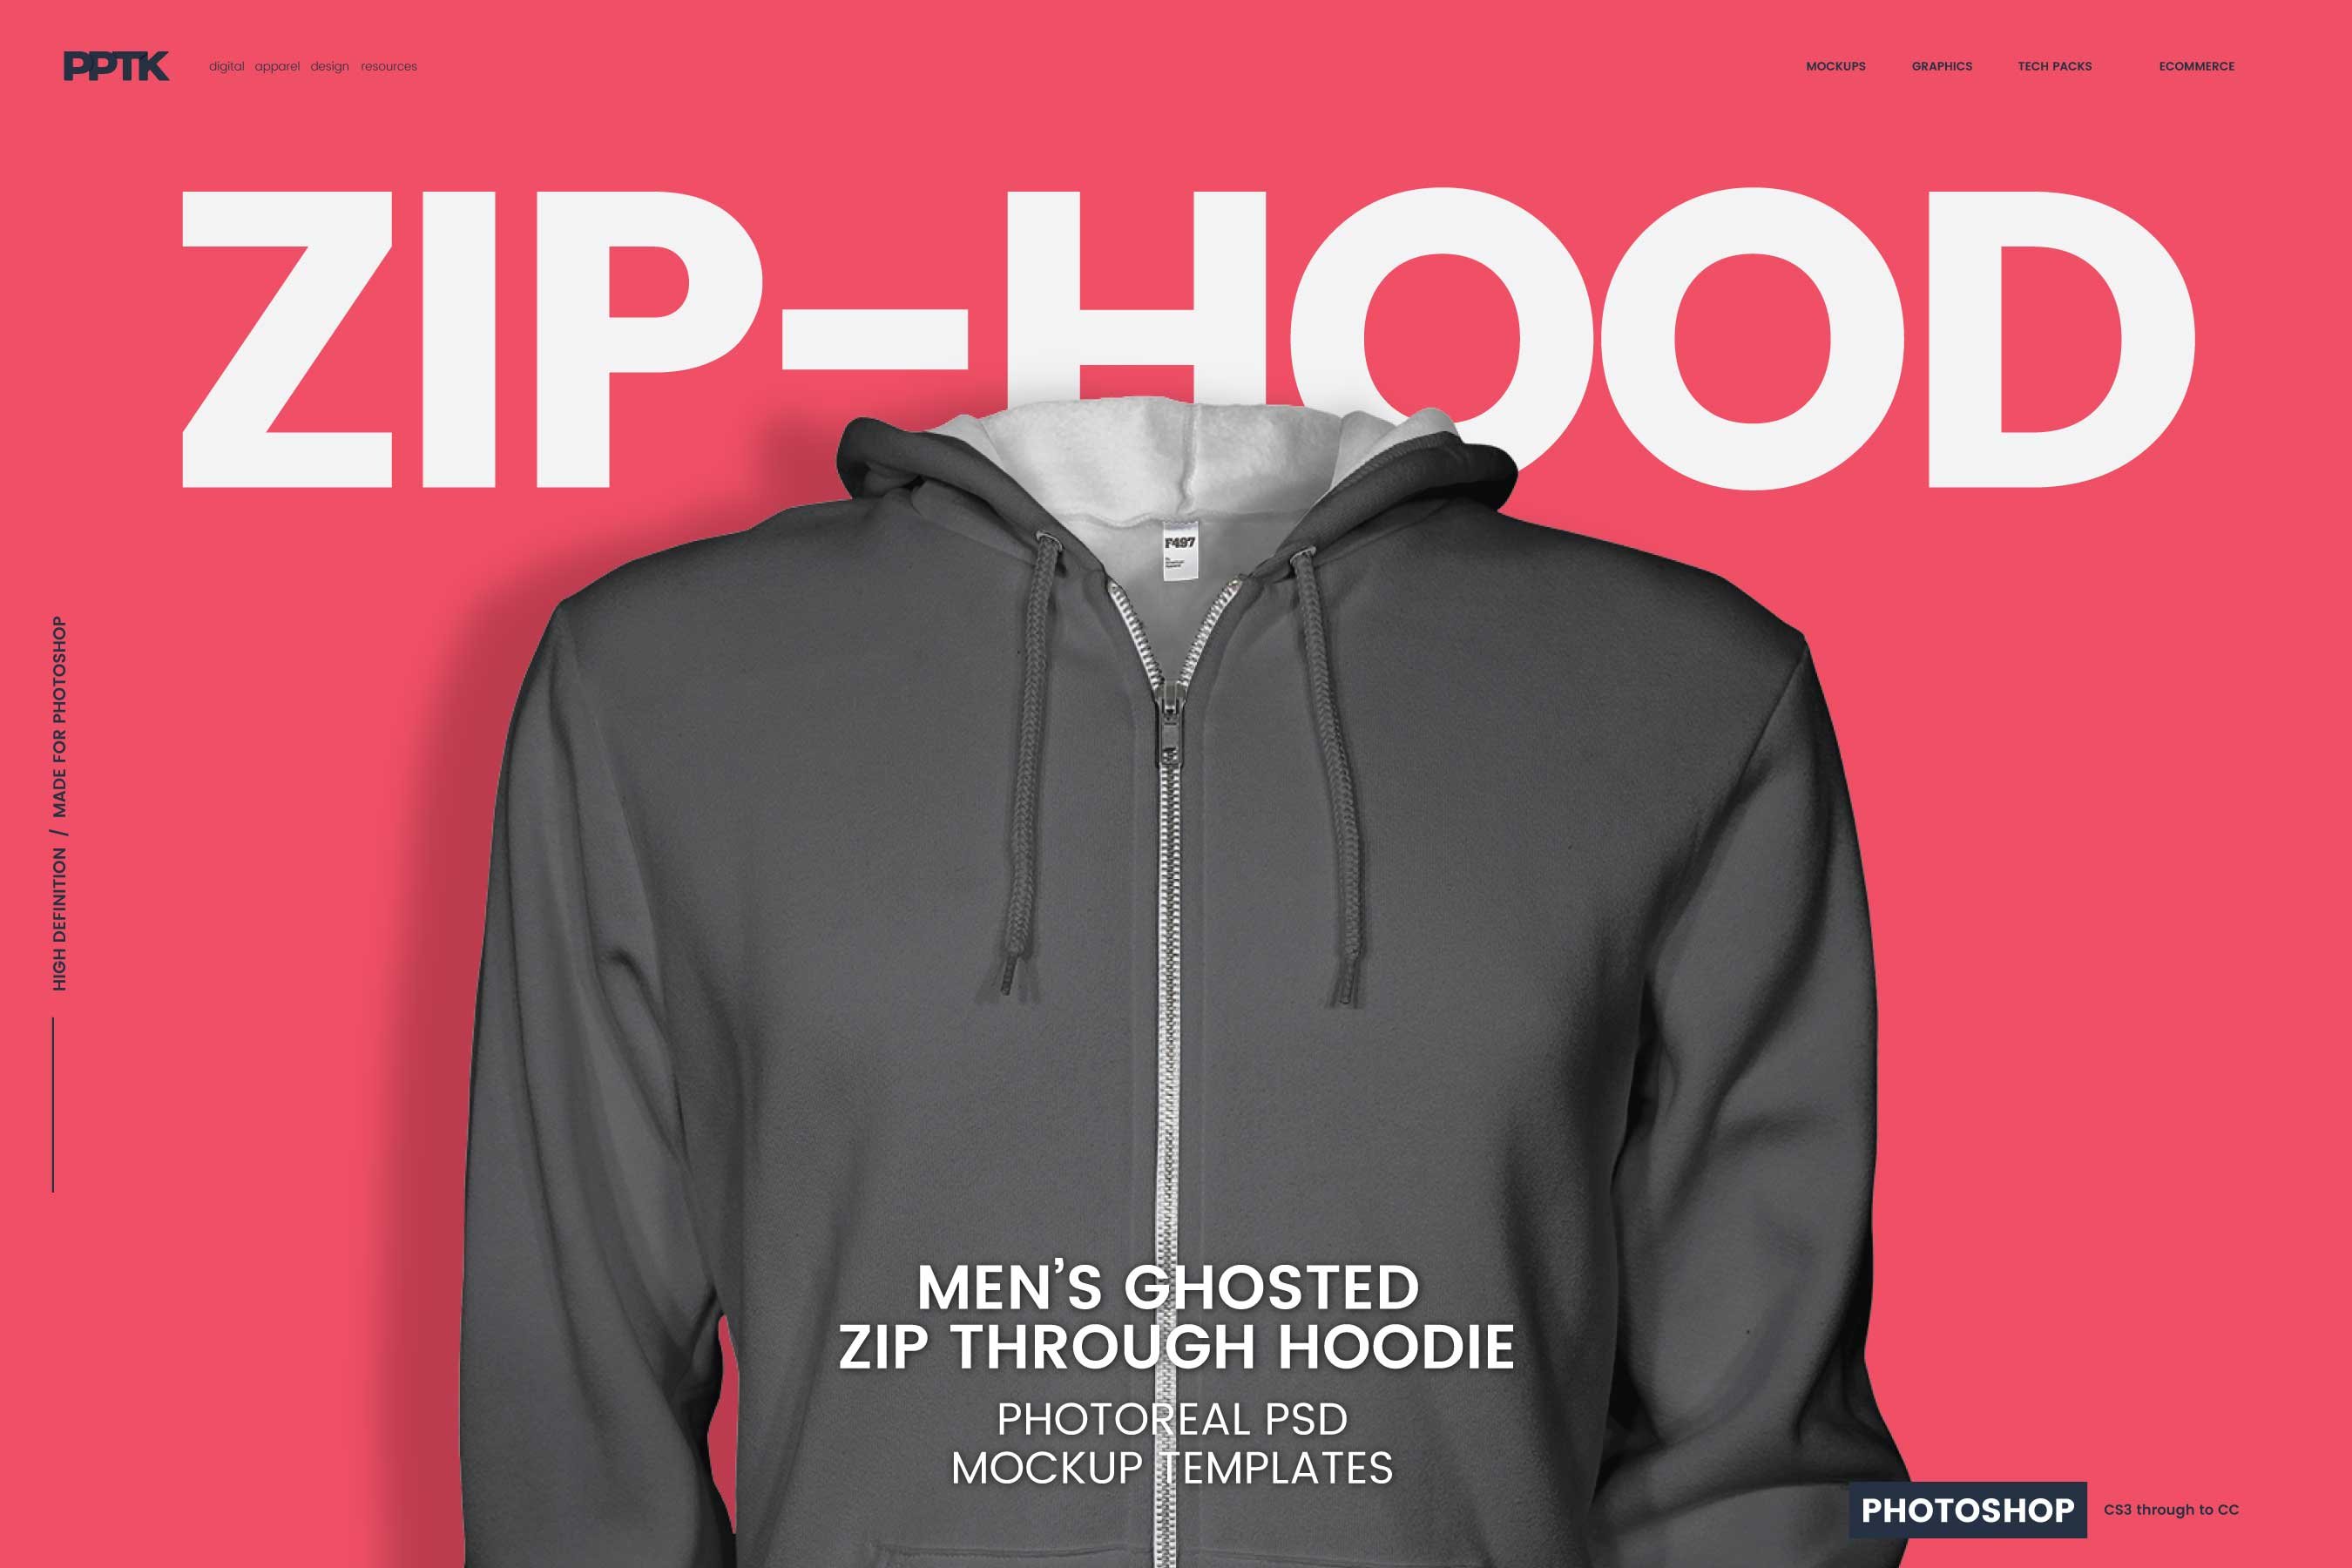 Mens Ghosted Zip Hoodie Templates cover image.